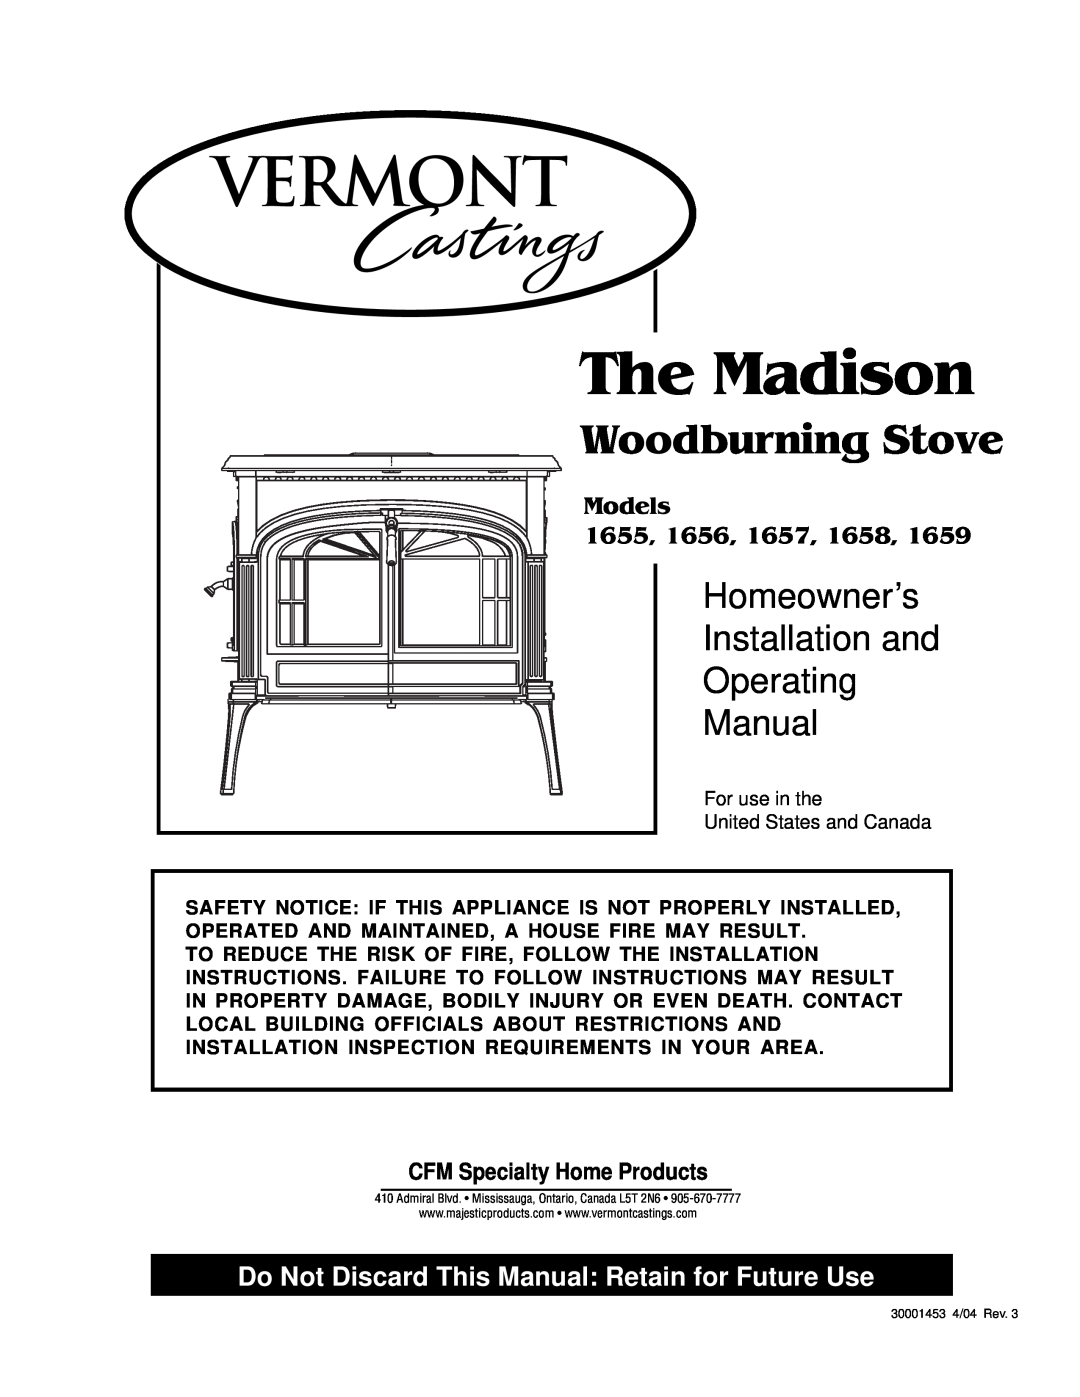 Vermont Casting 410 installation instructions CFM Specialty Home Products, The Madison, Woodburning Stove, Homeowner’s 